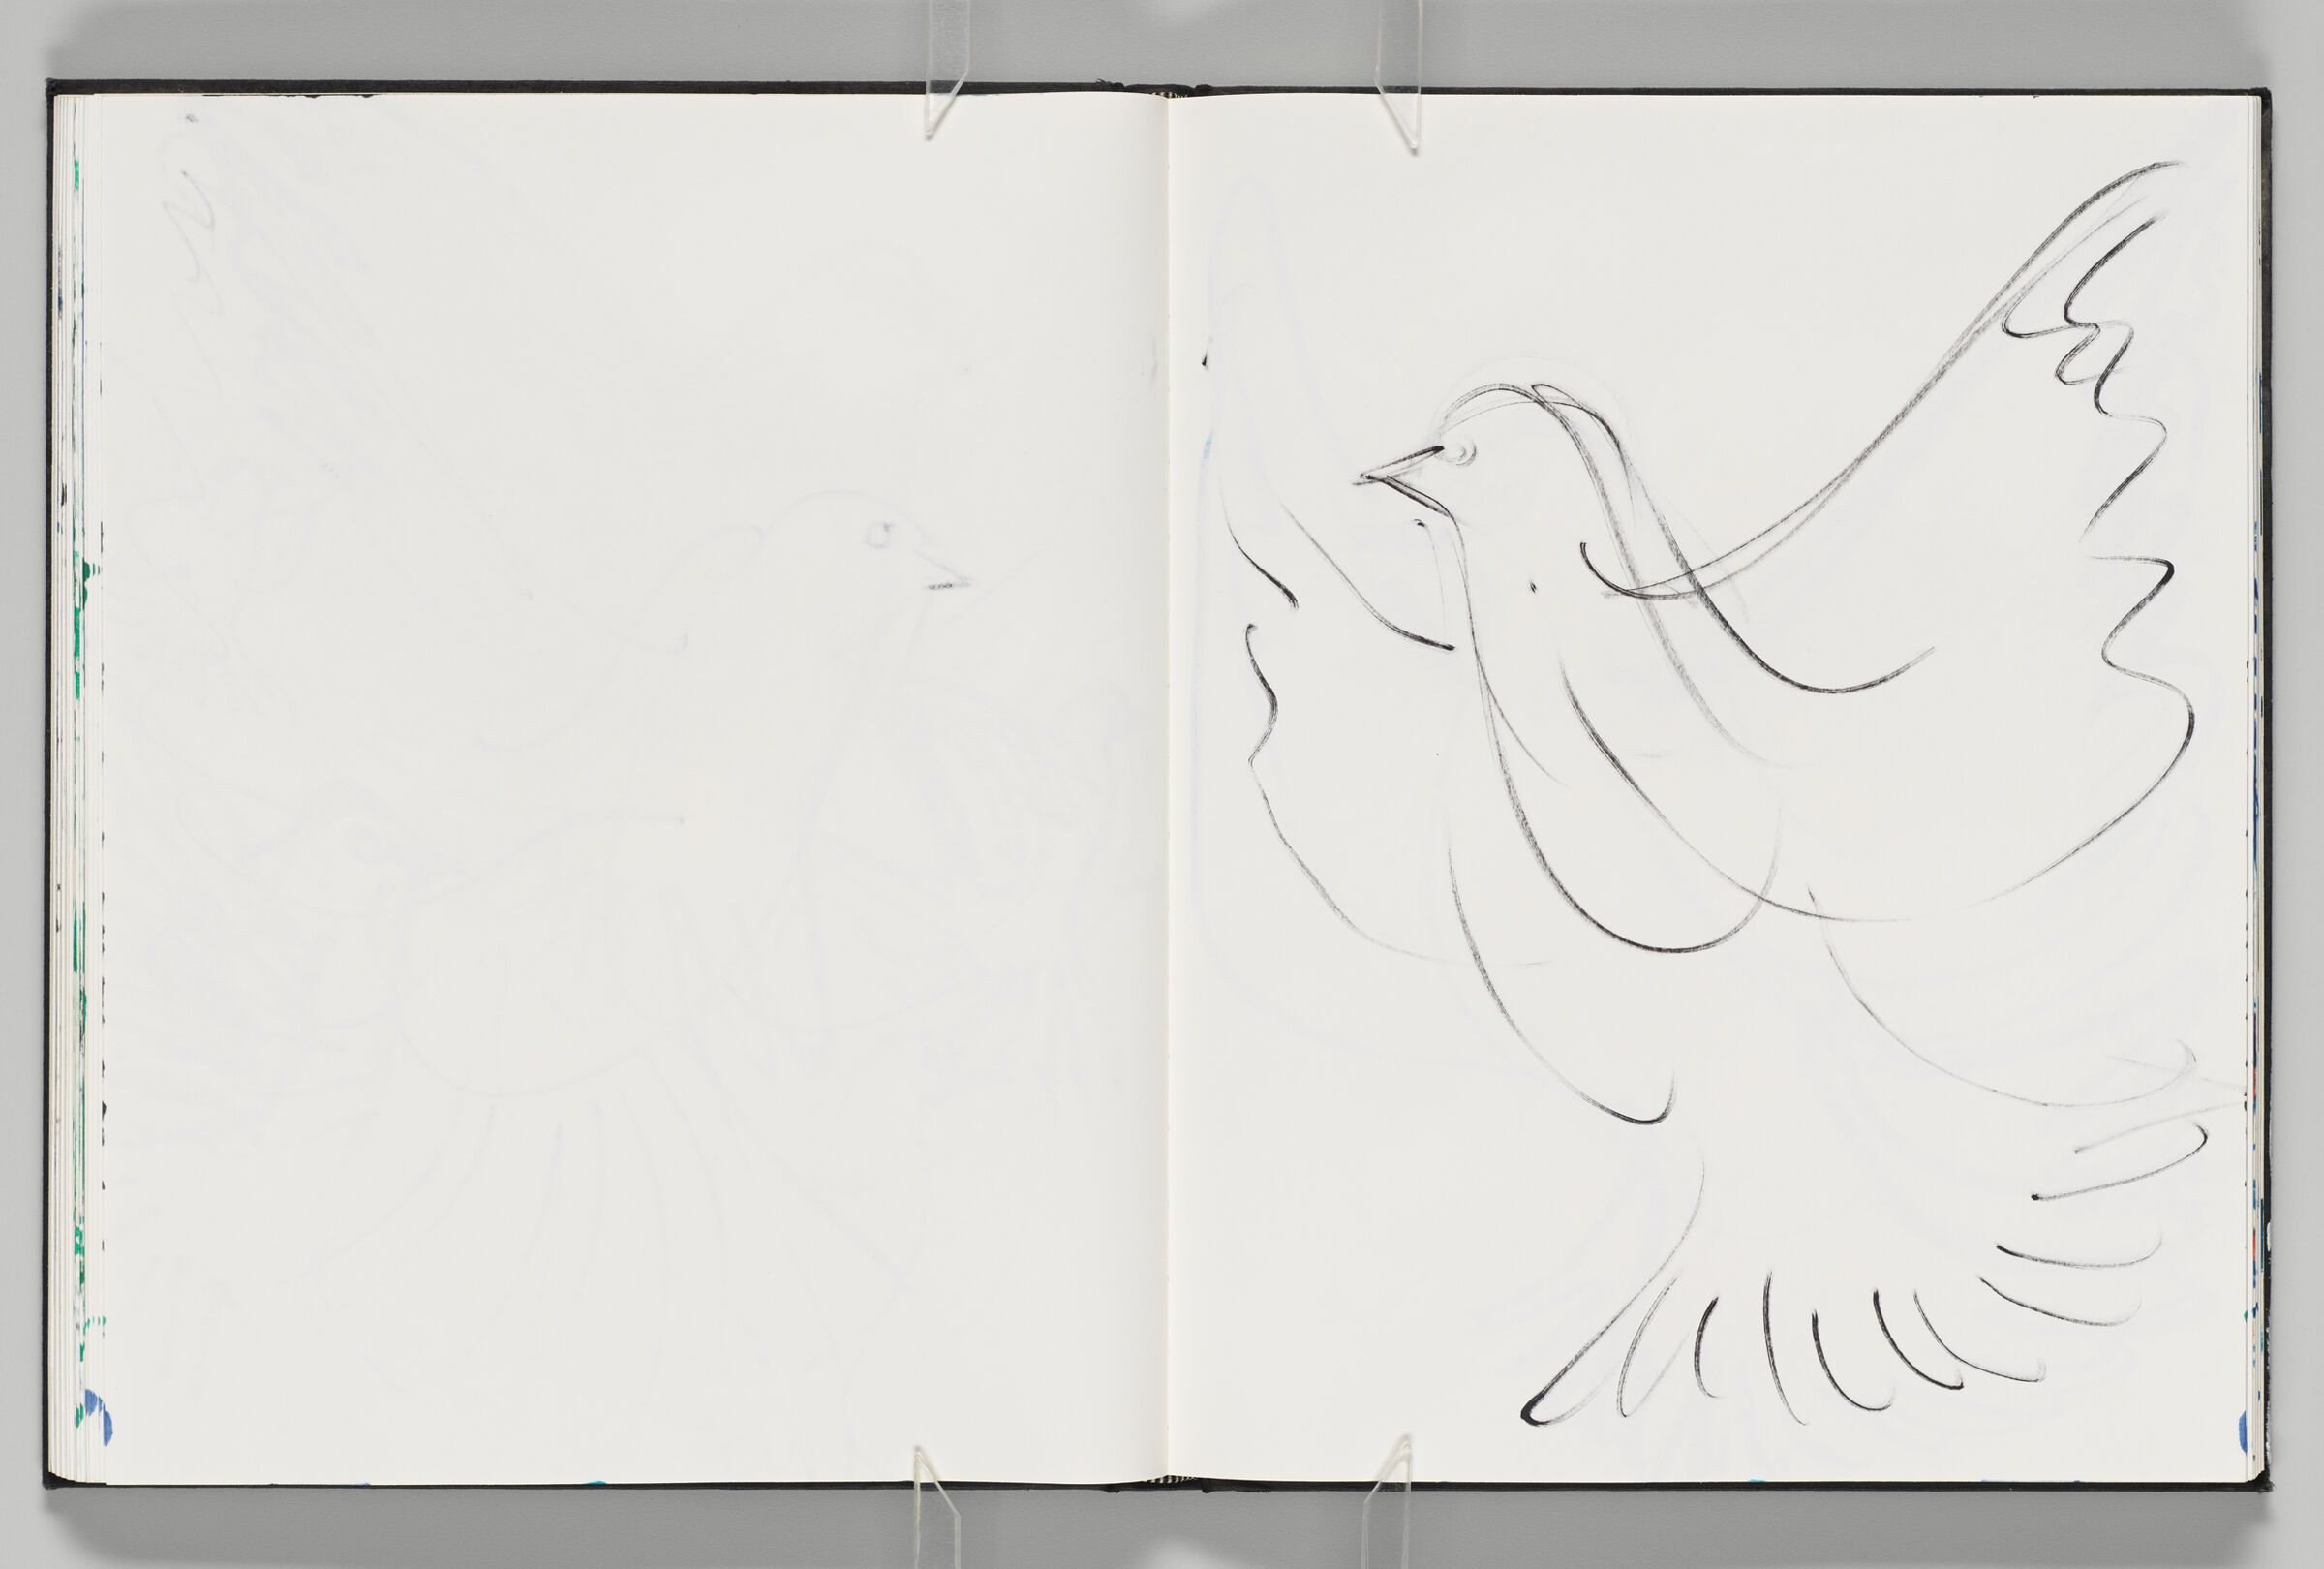 Untitled (Faint Bleed-Through Of Previous Page, Left Page); Untitled (Dove, Right Page)